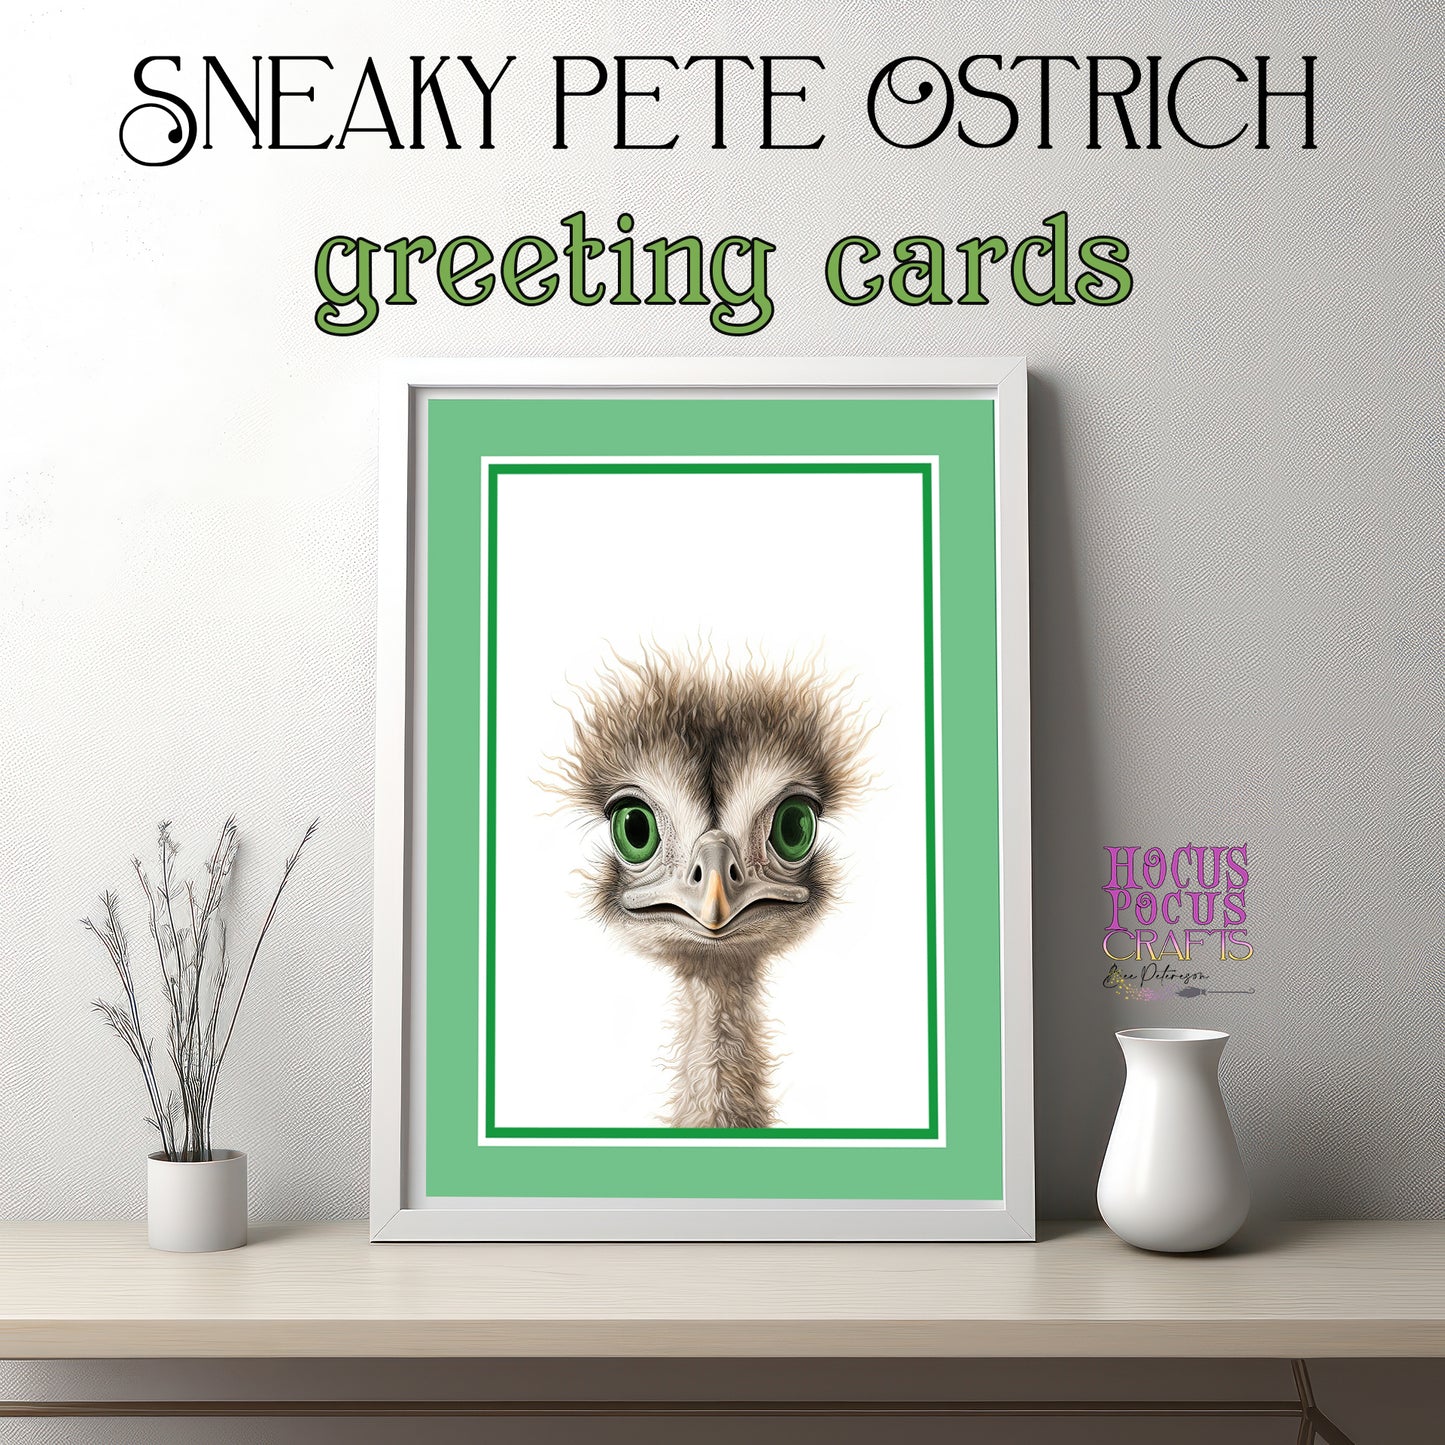 Sneaky Pete Ostrich Greeting Card